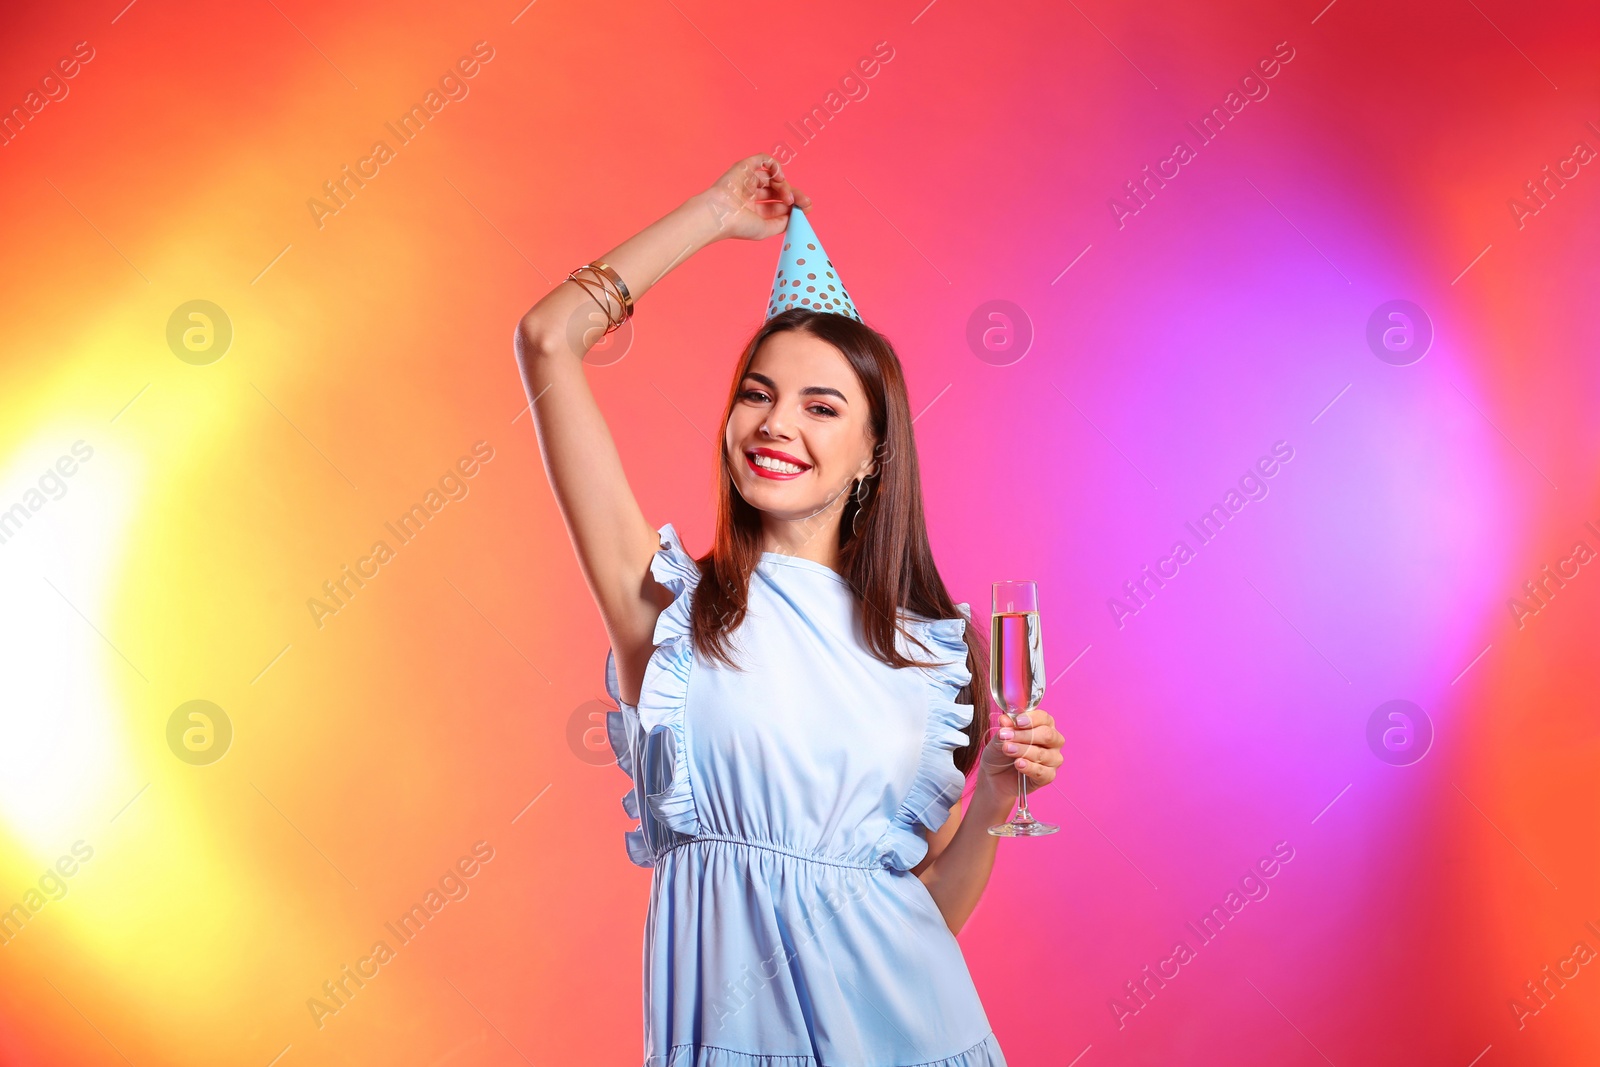 Photo of Portrait of happy woman with party hat and champagne in glass on color background